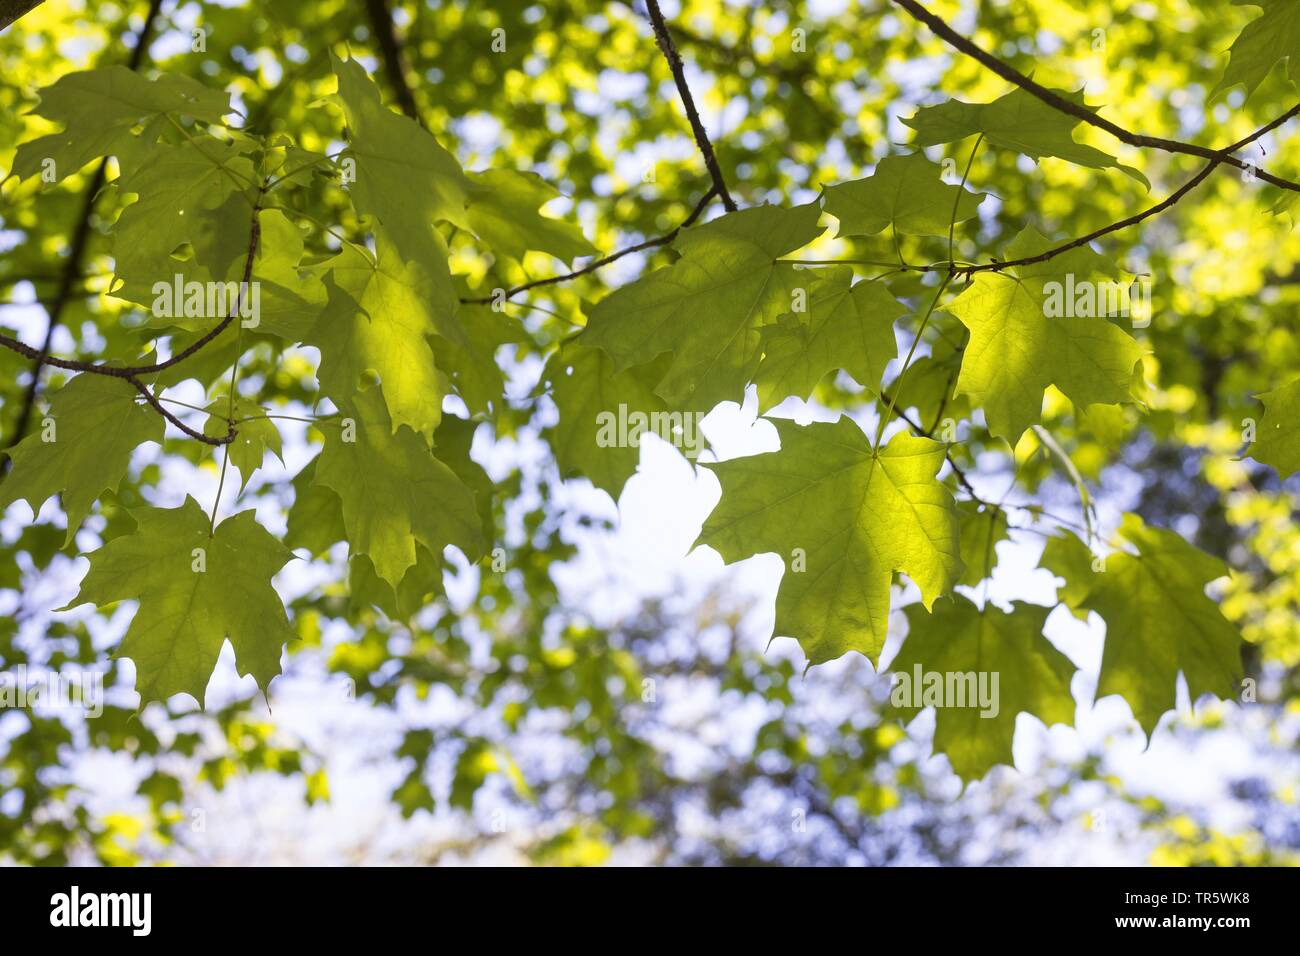 rock maple, sugar maple (Acer saccharum), leaves on a branch in backlight Stock Photo